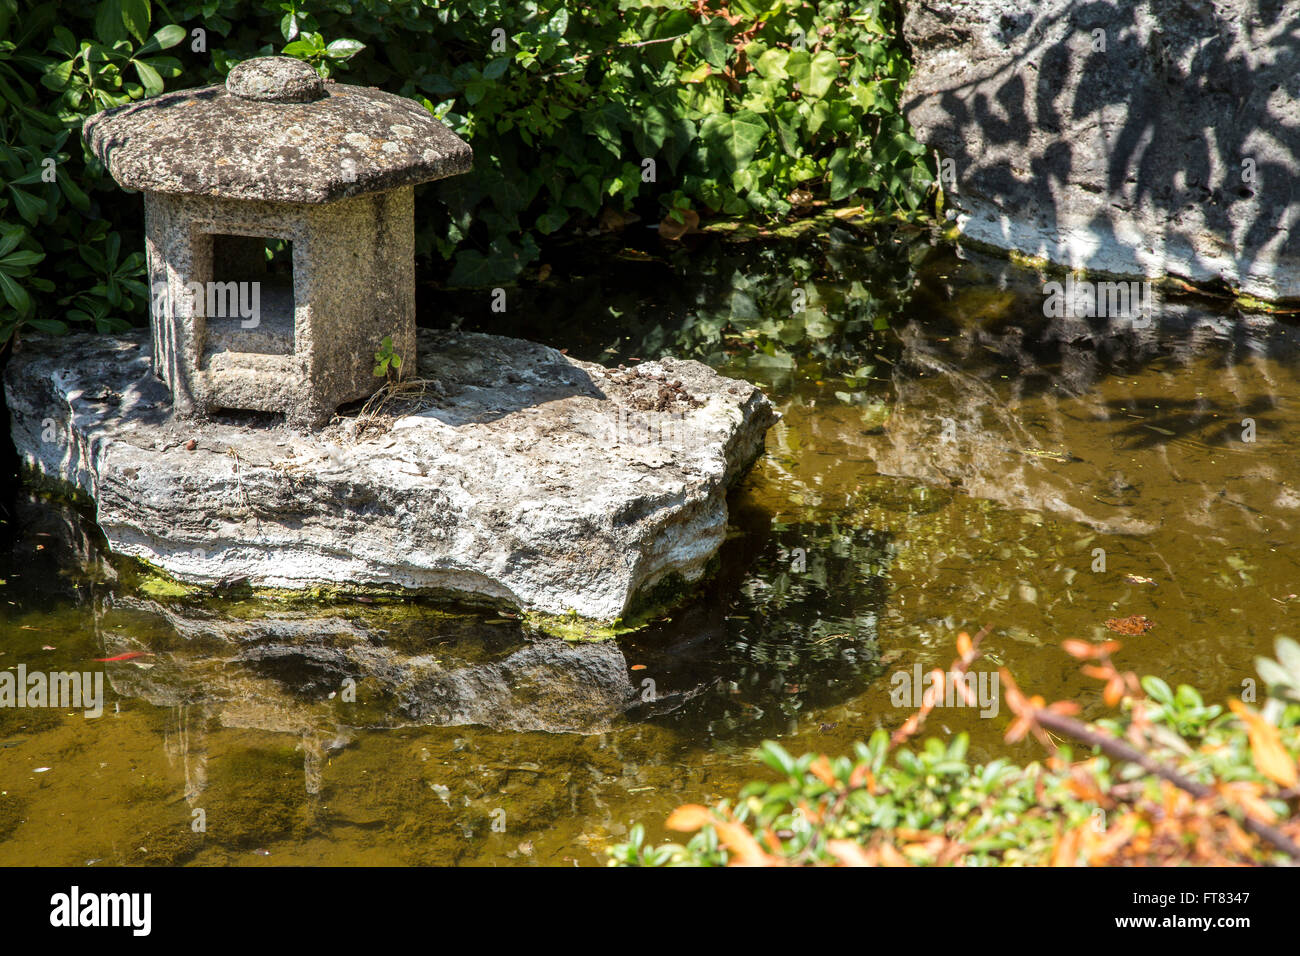 View on green water in an ornamental oriental garden pool with stone decorative construction Stock Photo